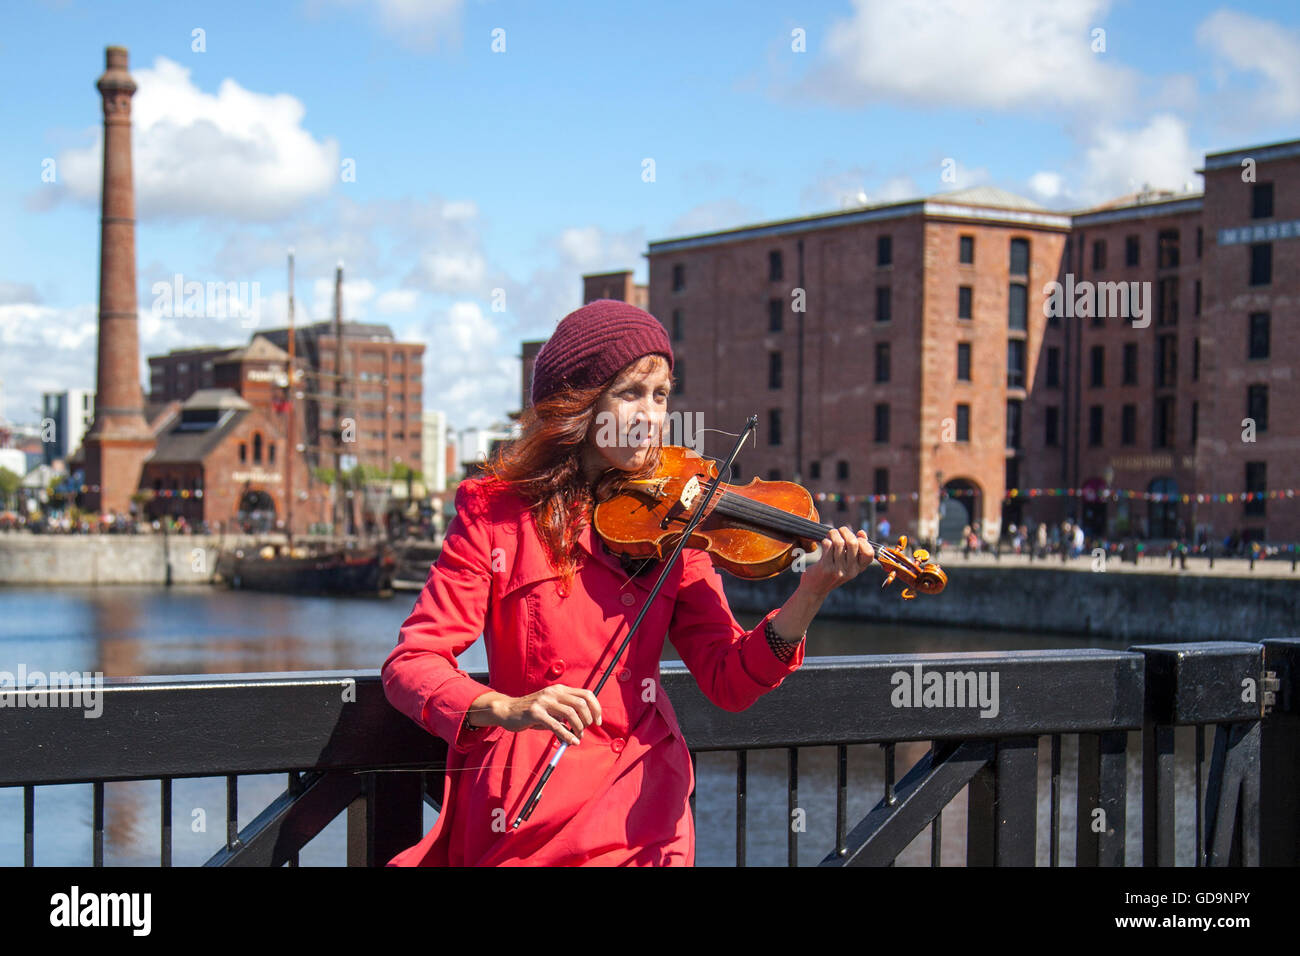 Female street busker playing the violin or fiddle with Albert dock in the background, in dockland Liverpool. Buskers on the coastal riverside promenade on Liverpool’s Waterfront, Merseyside, UK.  The Pier Head is a central major tourist attraction with several notable landmarks and modern developments which focus attention on the cities long history and heritage as a major port on the Mersey. Stock Photo